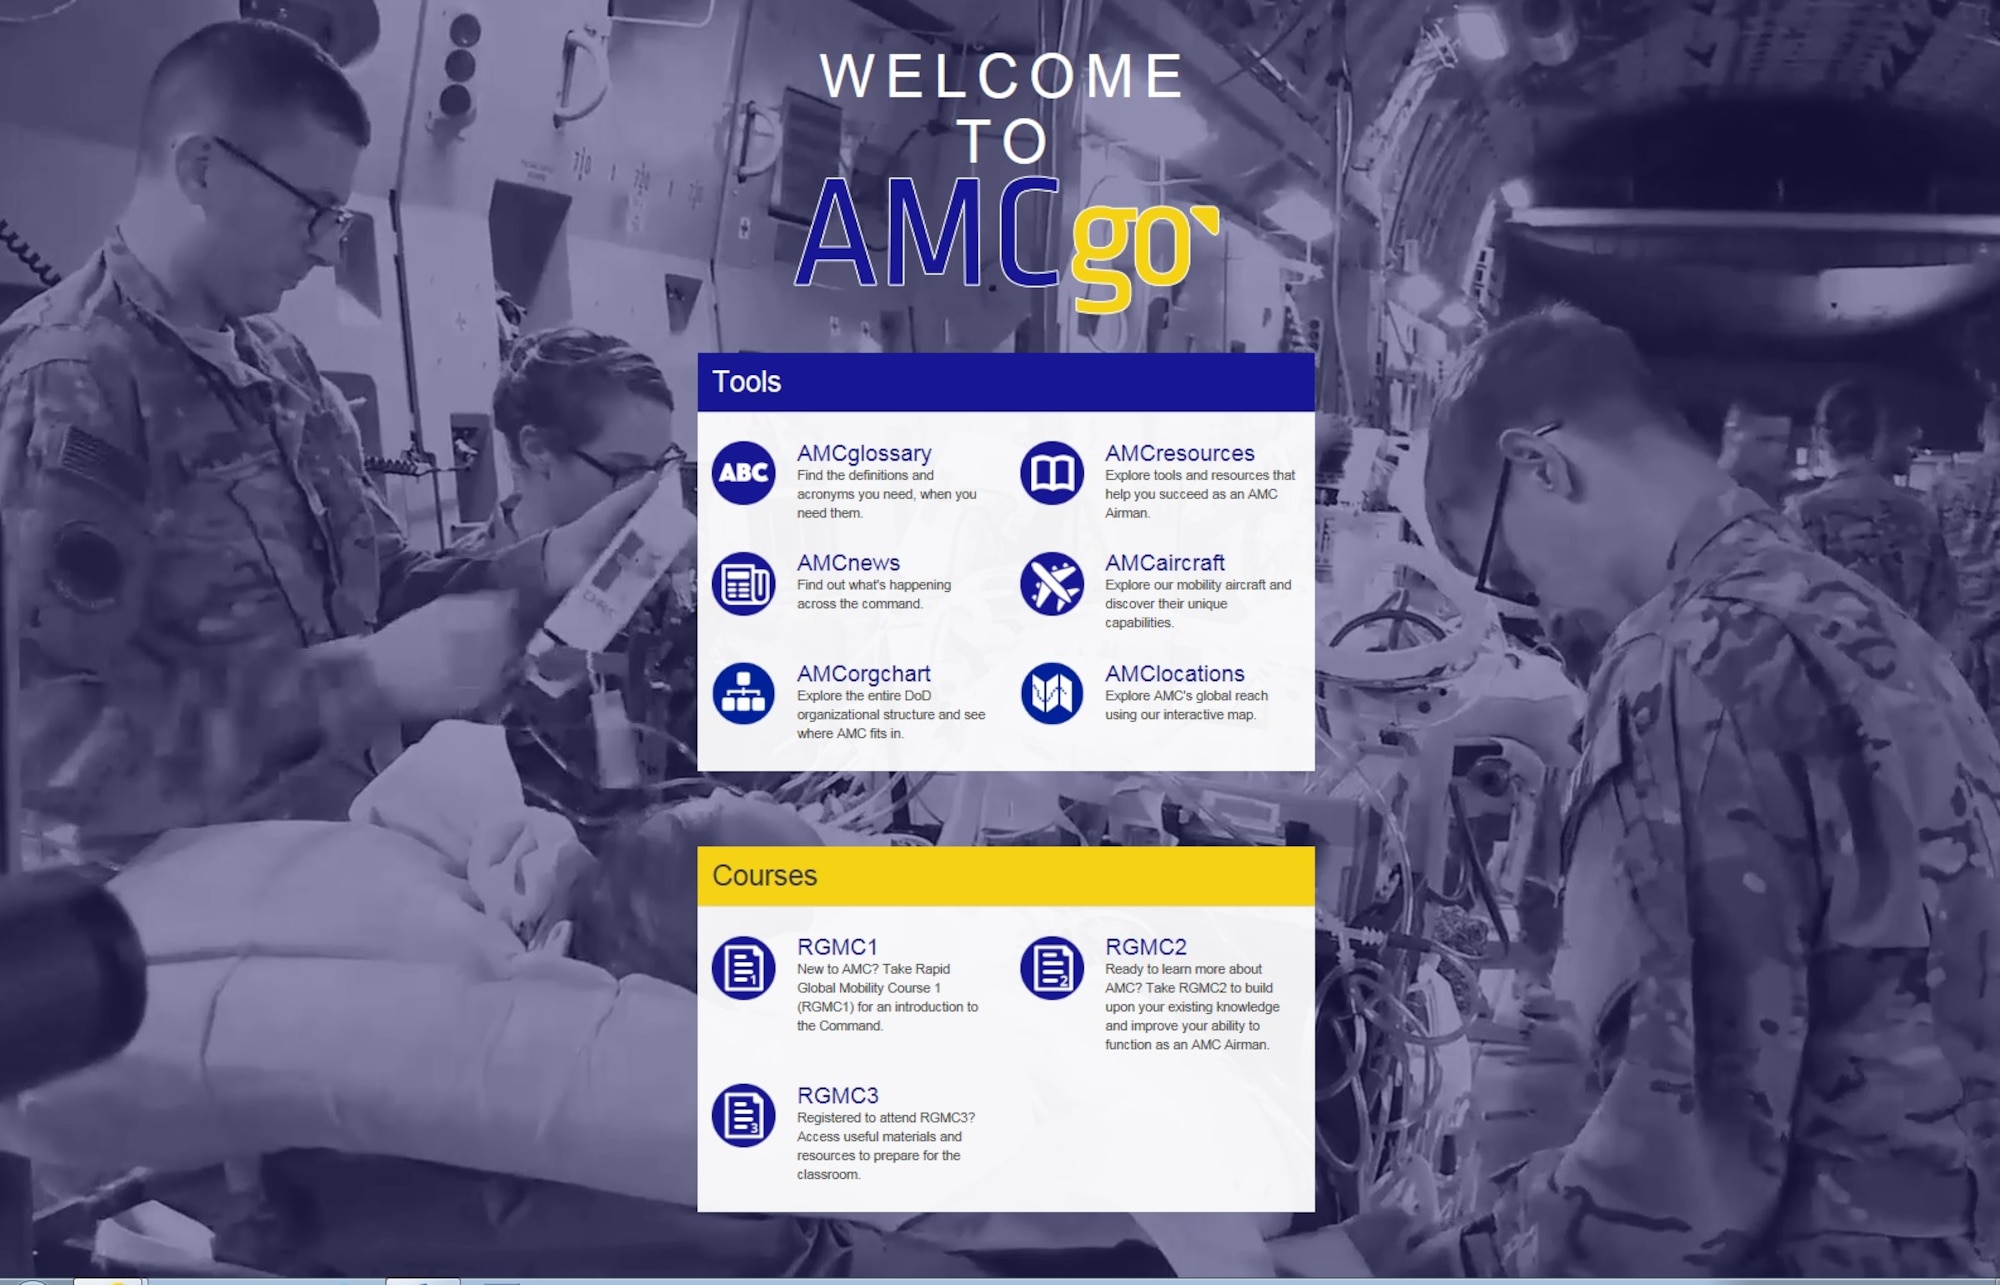 The AMCgo app is an on-the-go resource for Mobility information. The homepage can be visited at https://amcgo-staging.learning-transformation.com/ 